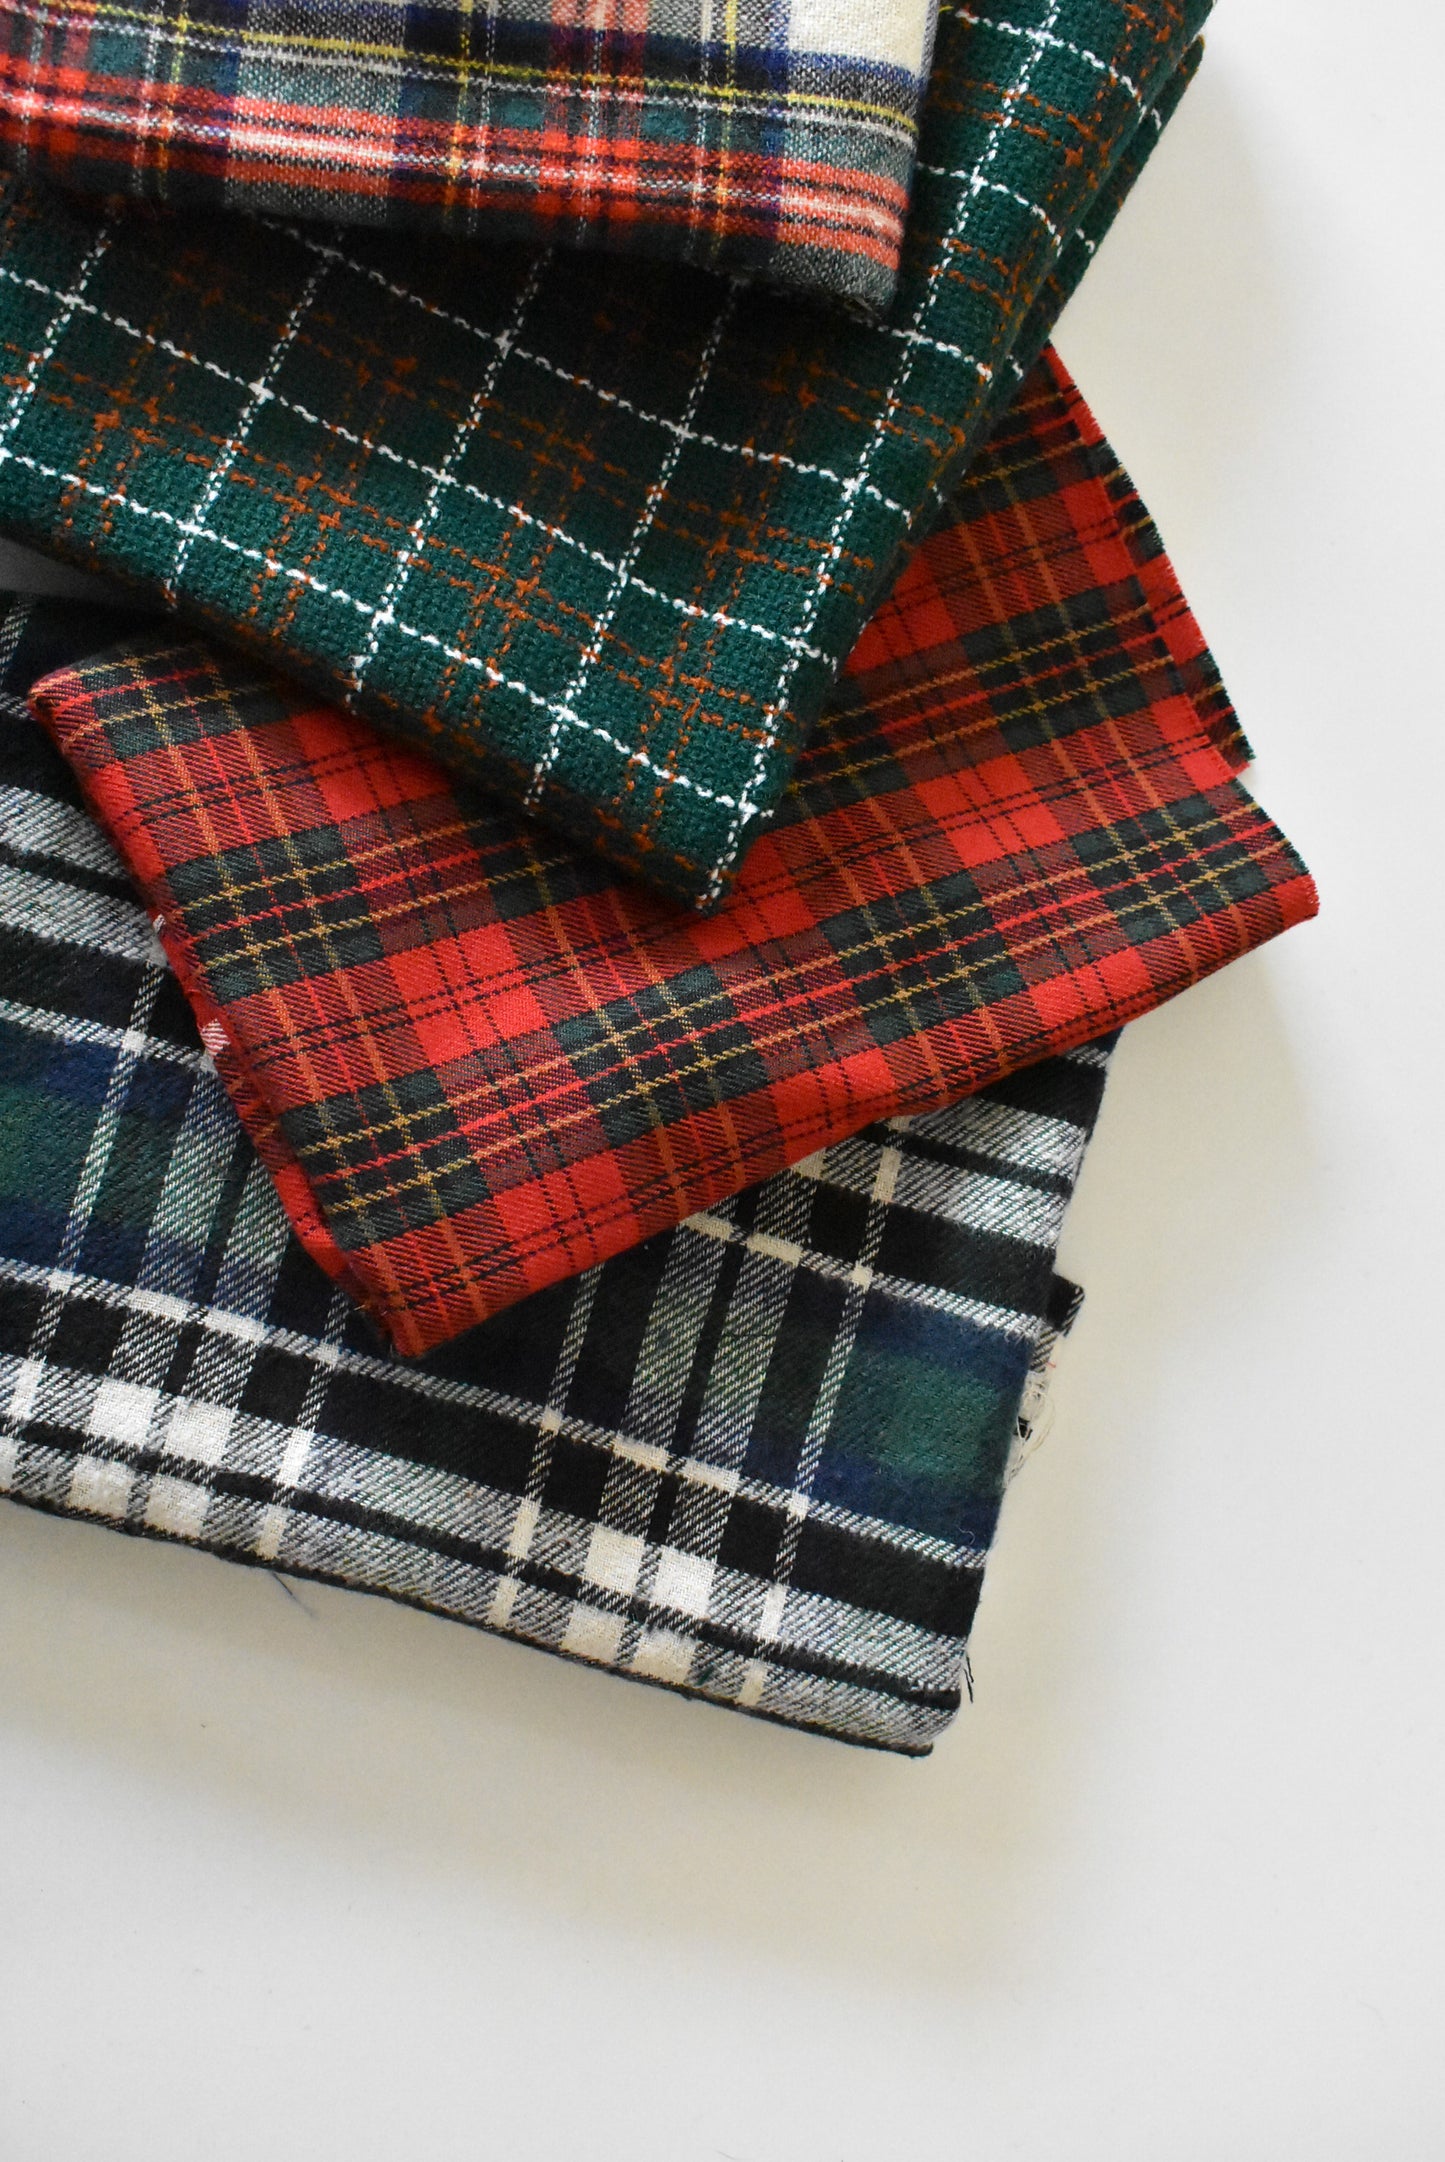 Plaid wool fabric pieces